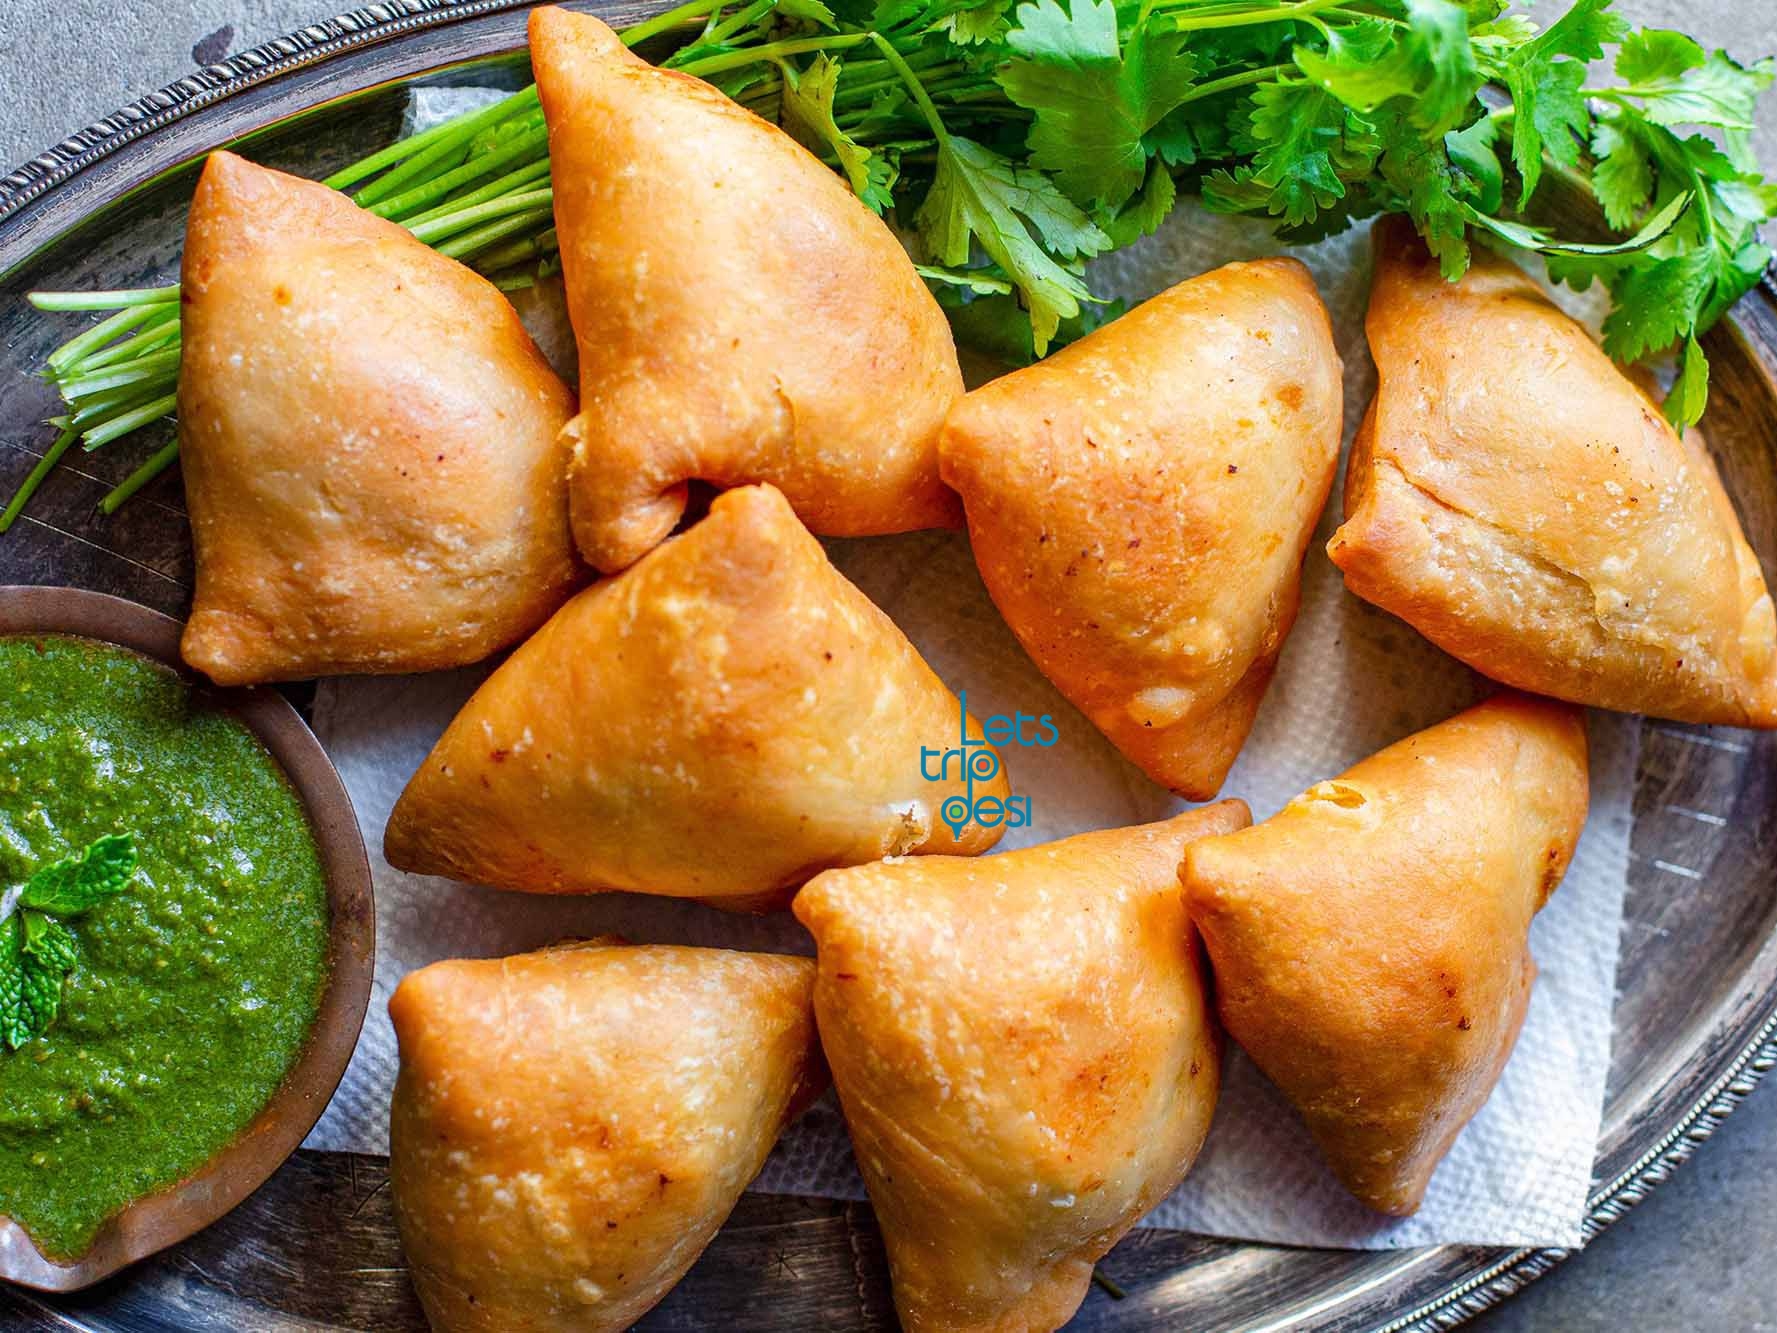 Saudi Restaurant Prepares Samosa in The Toilet For 30 Years Making Foodies Angry